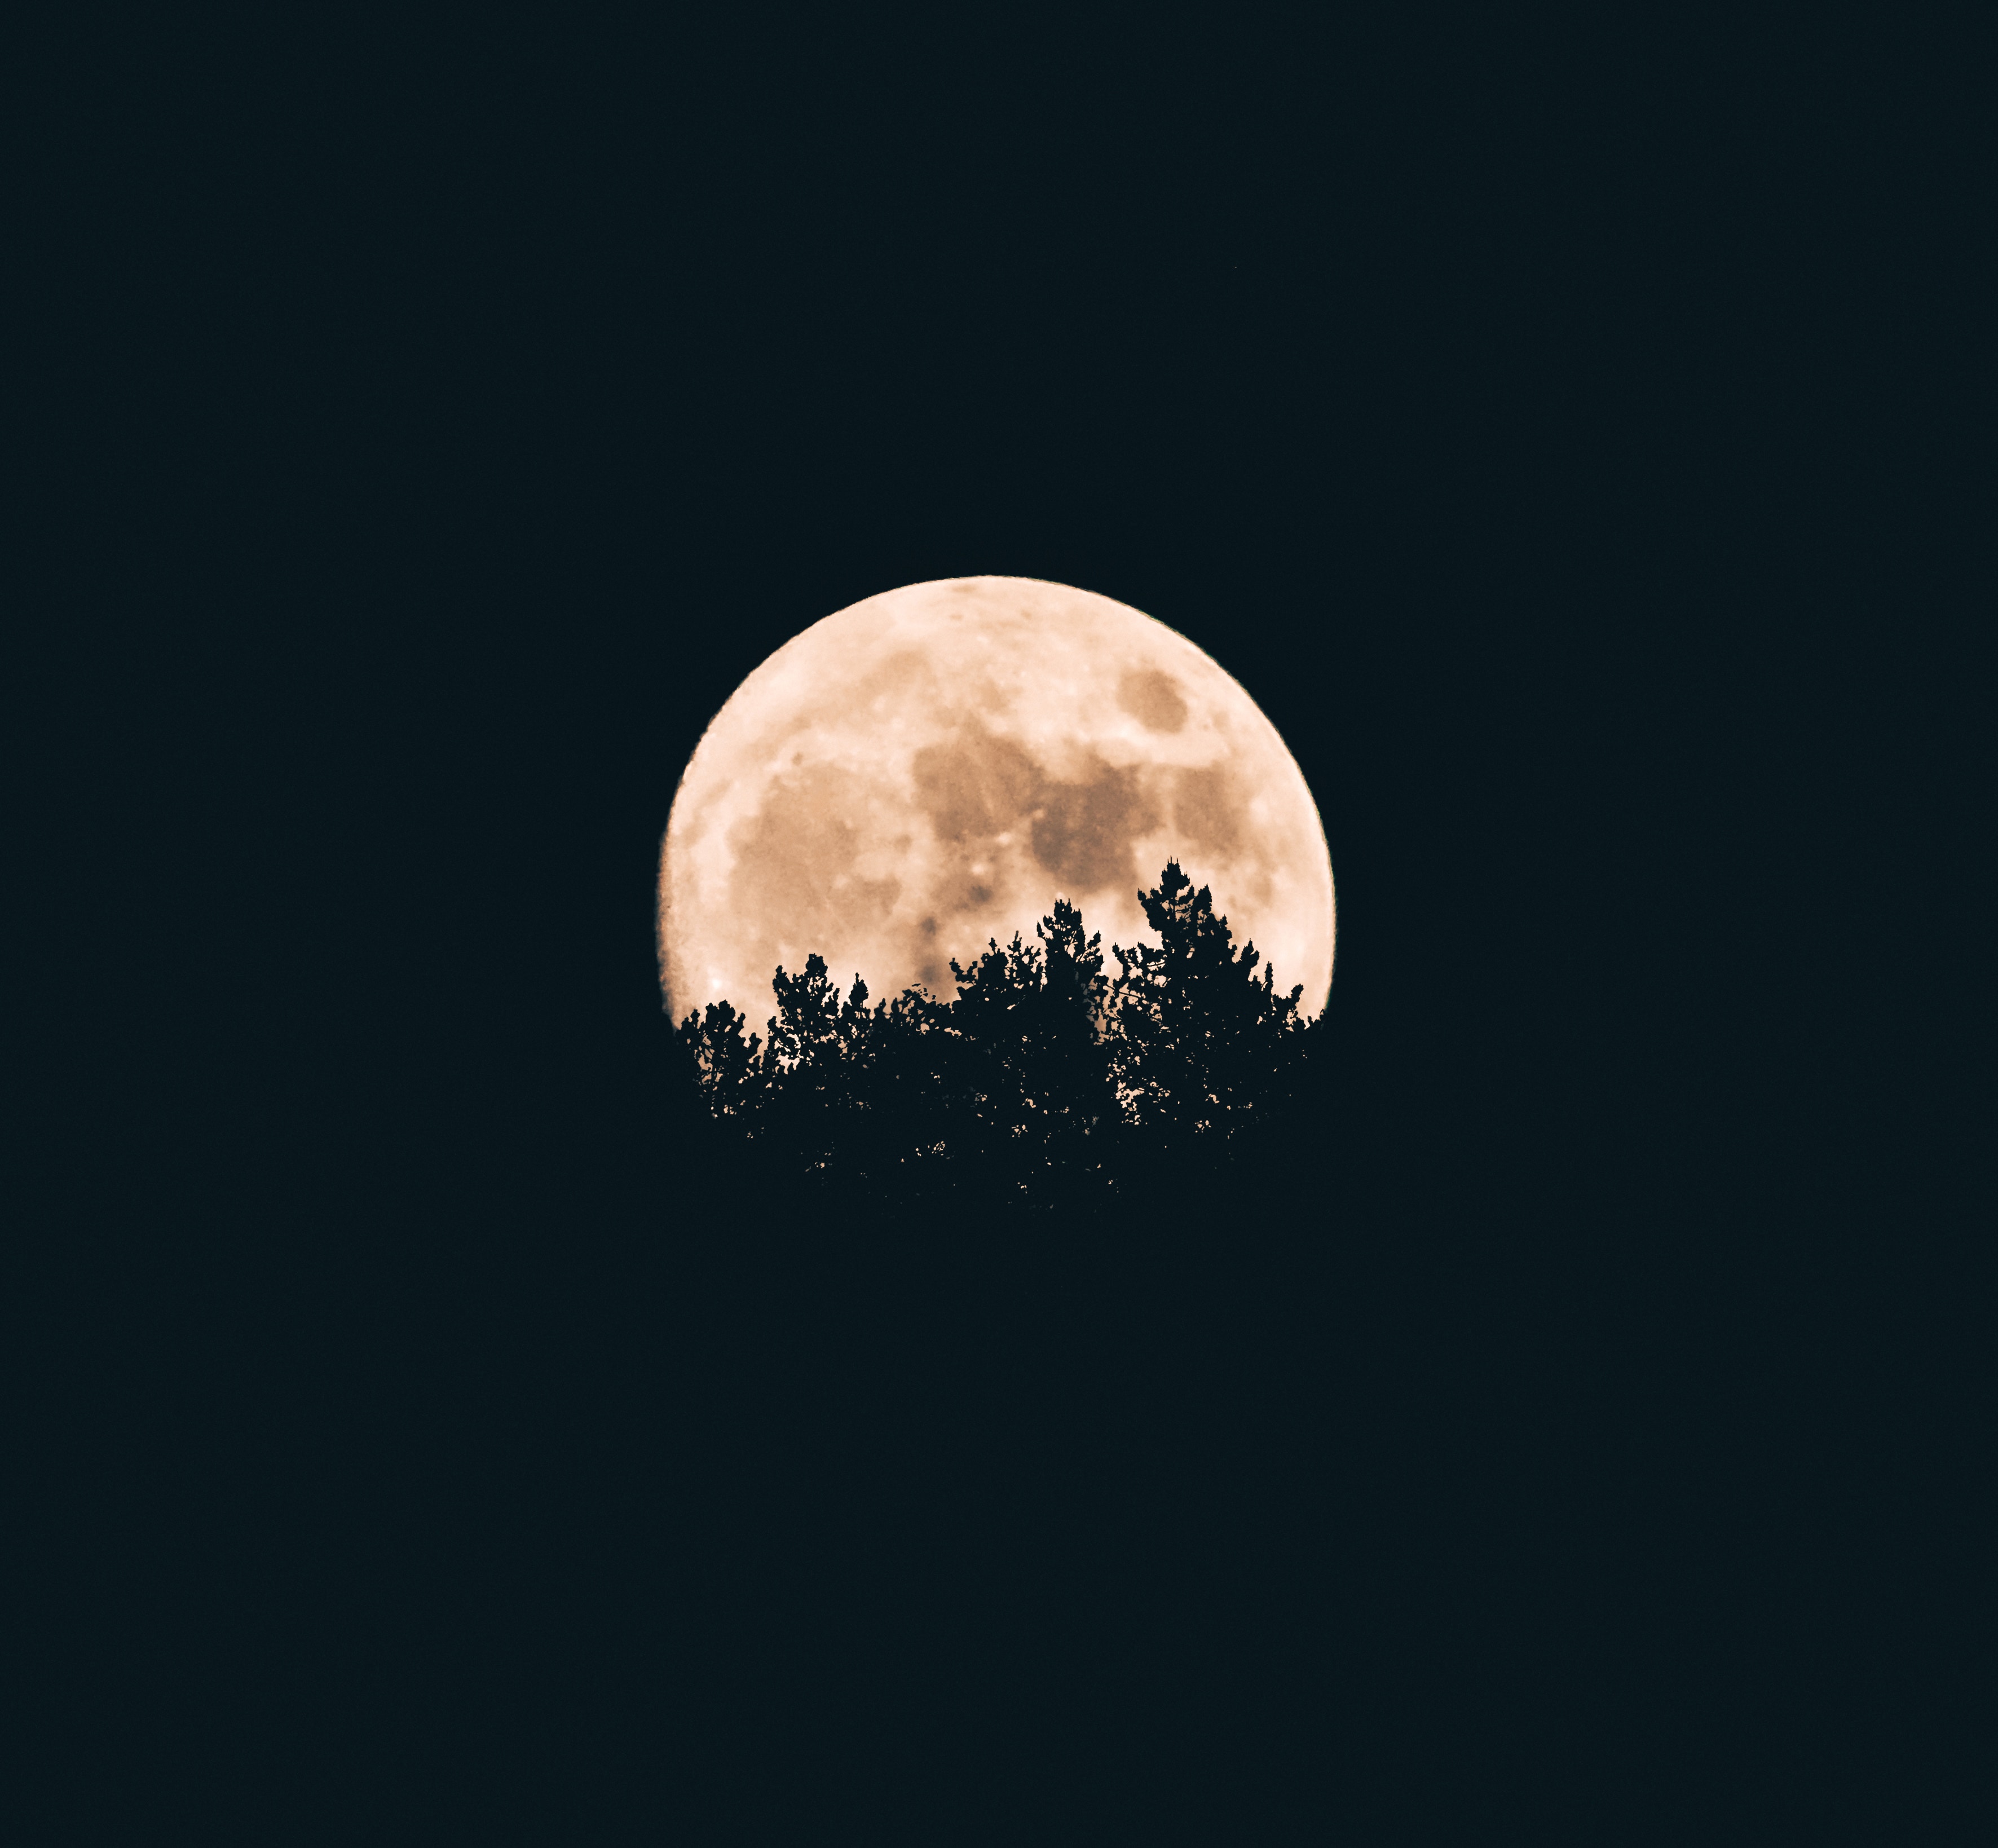 3543x3277 #tree, #sky, #night, #moon, #forest, #full moon, # wallpaper, #silhouette, #nature, #dark, #woodland, #fullmoon, #Free picture HD Wallpaper